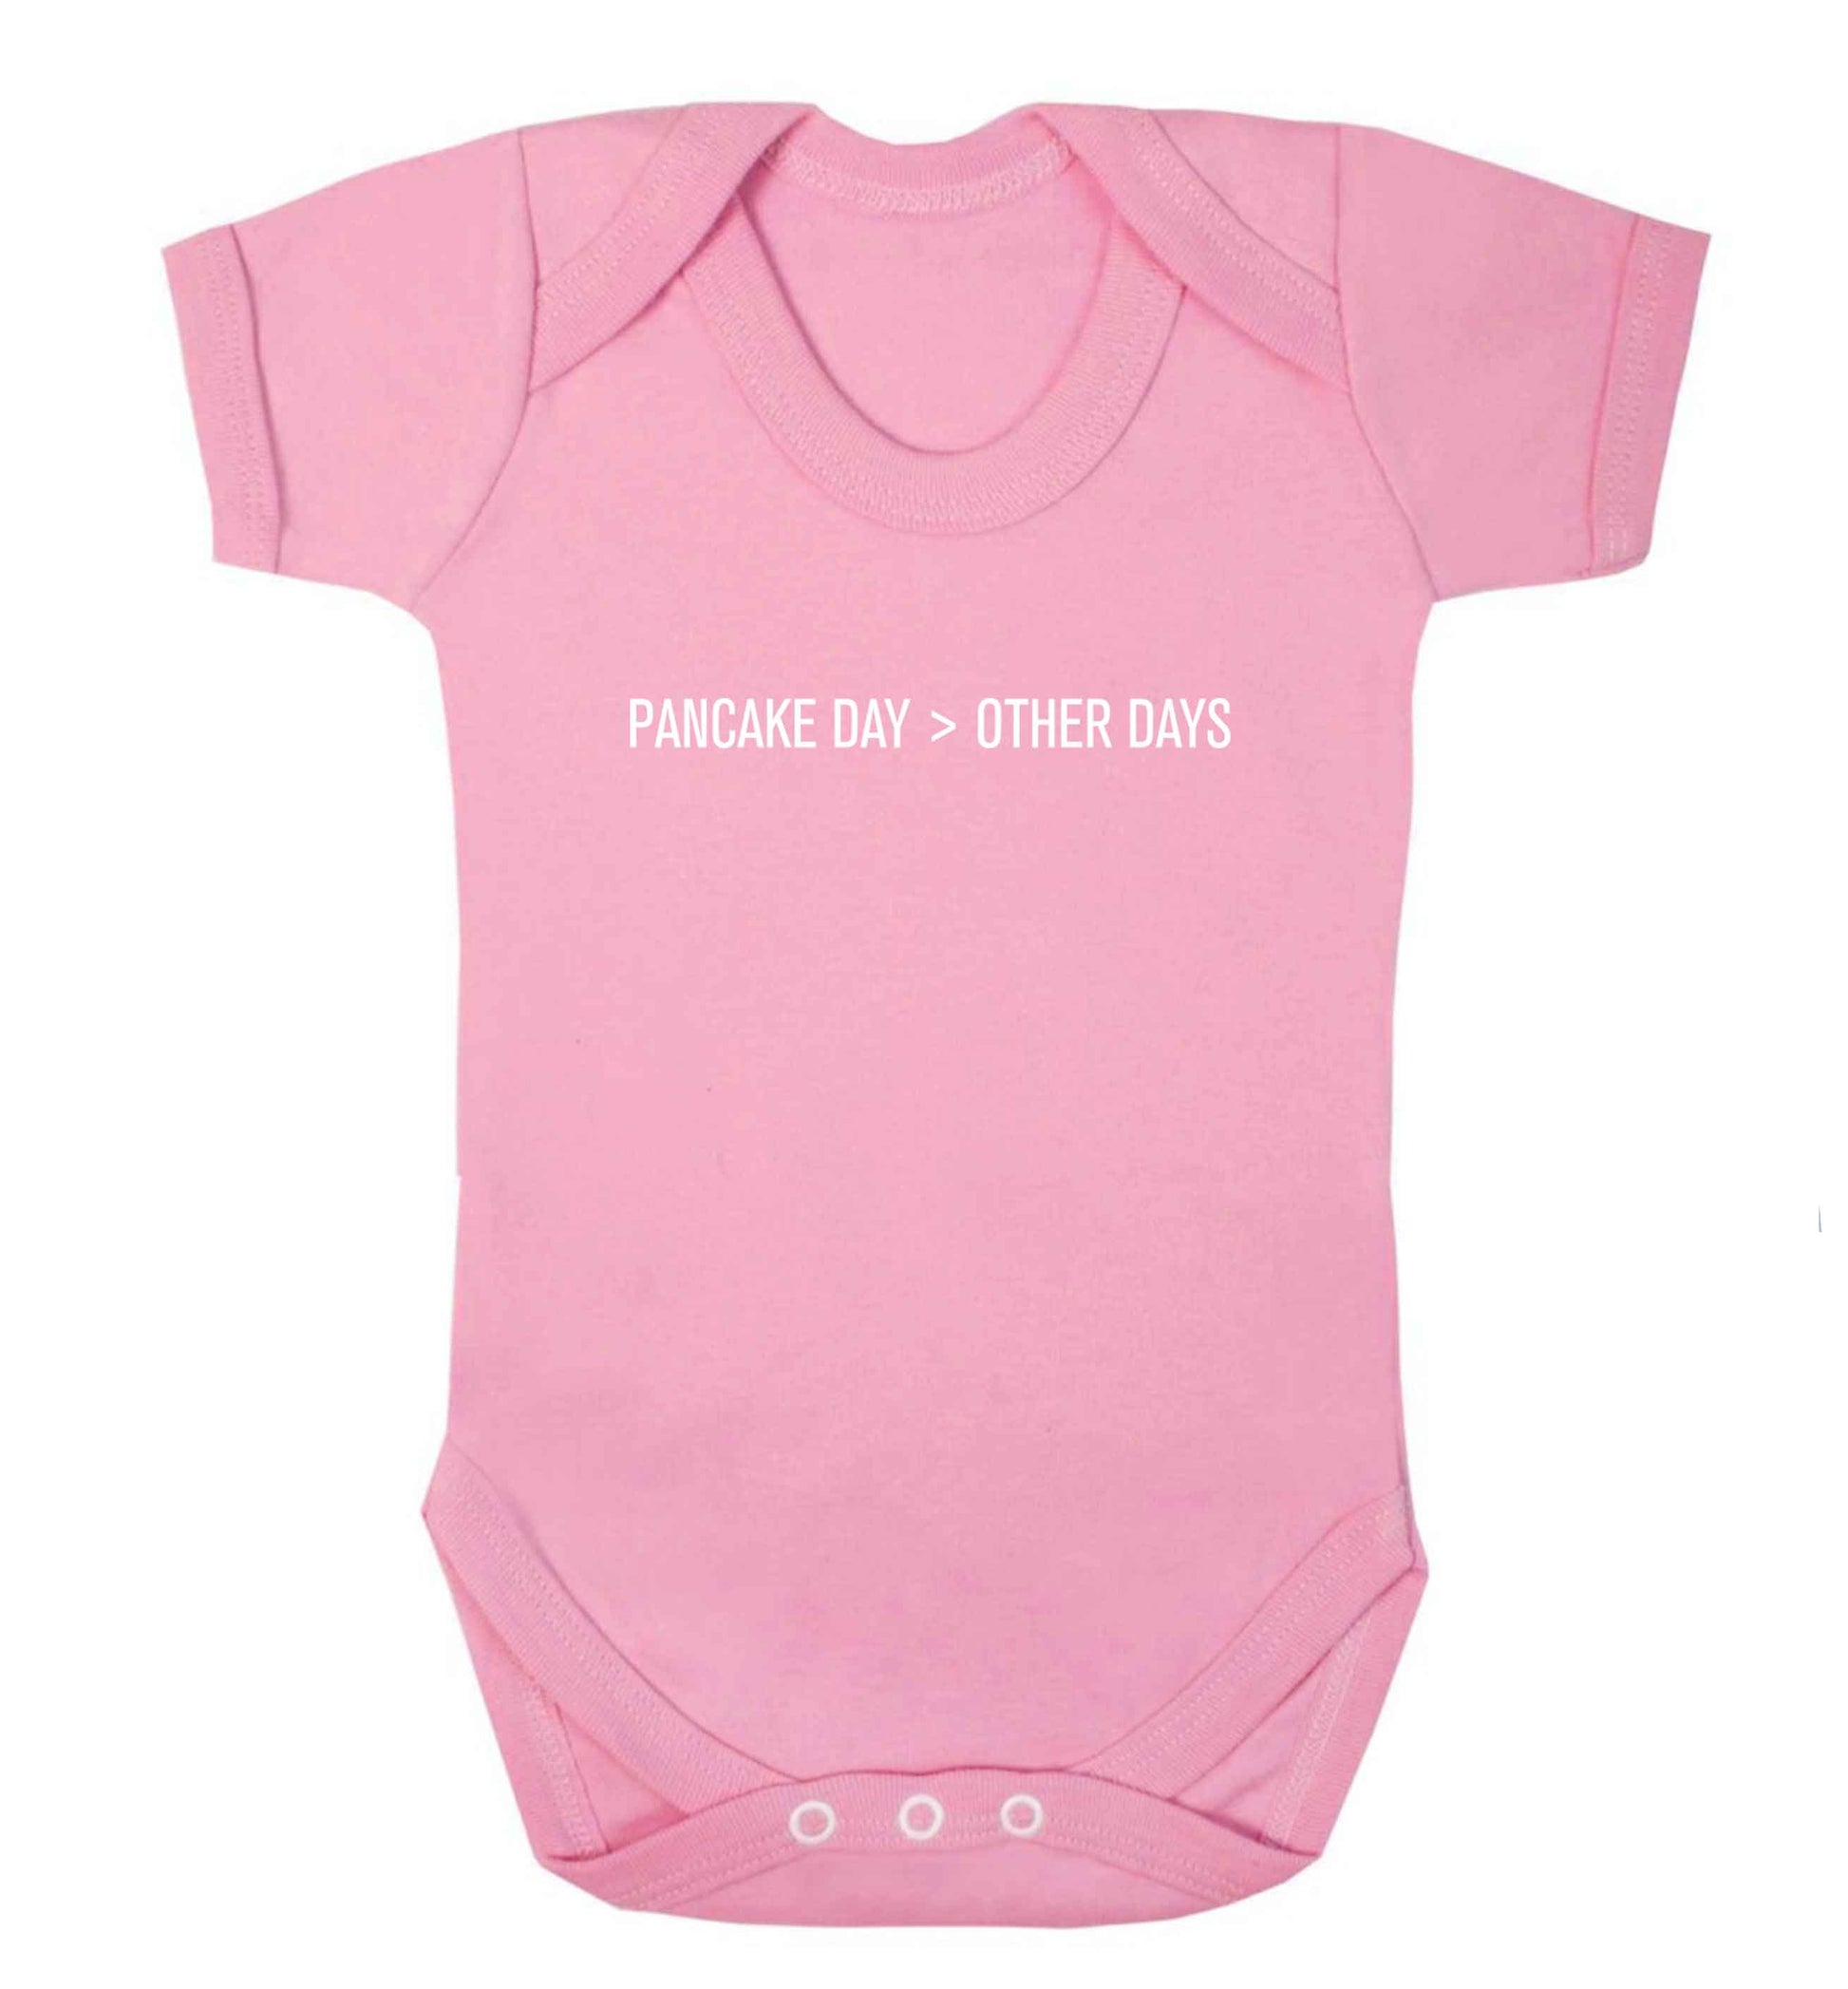 Pancake day > other days baby vest pale pink 18-24 months